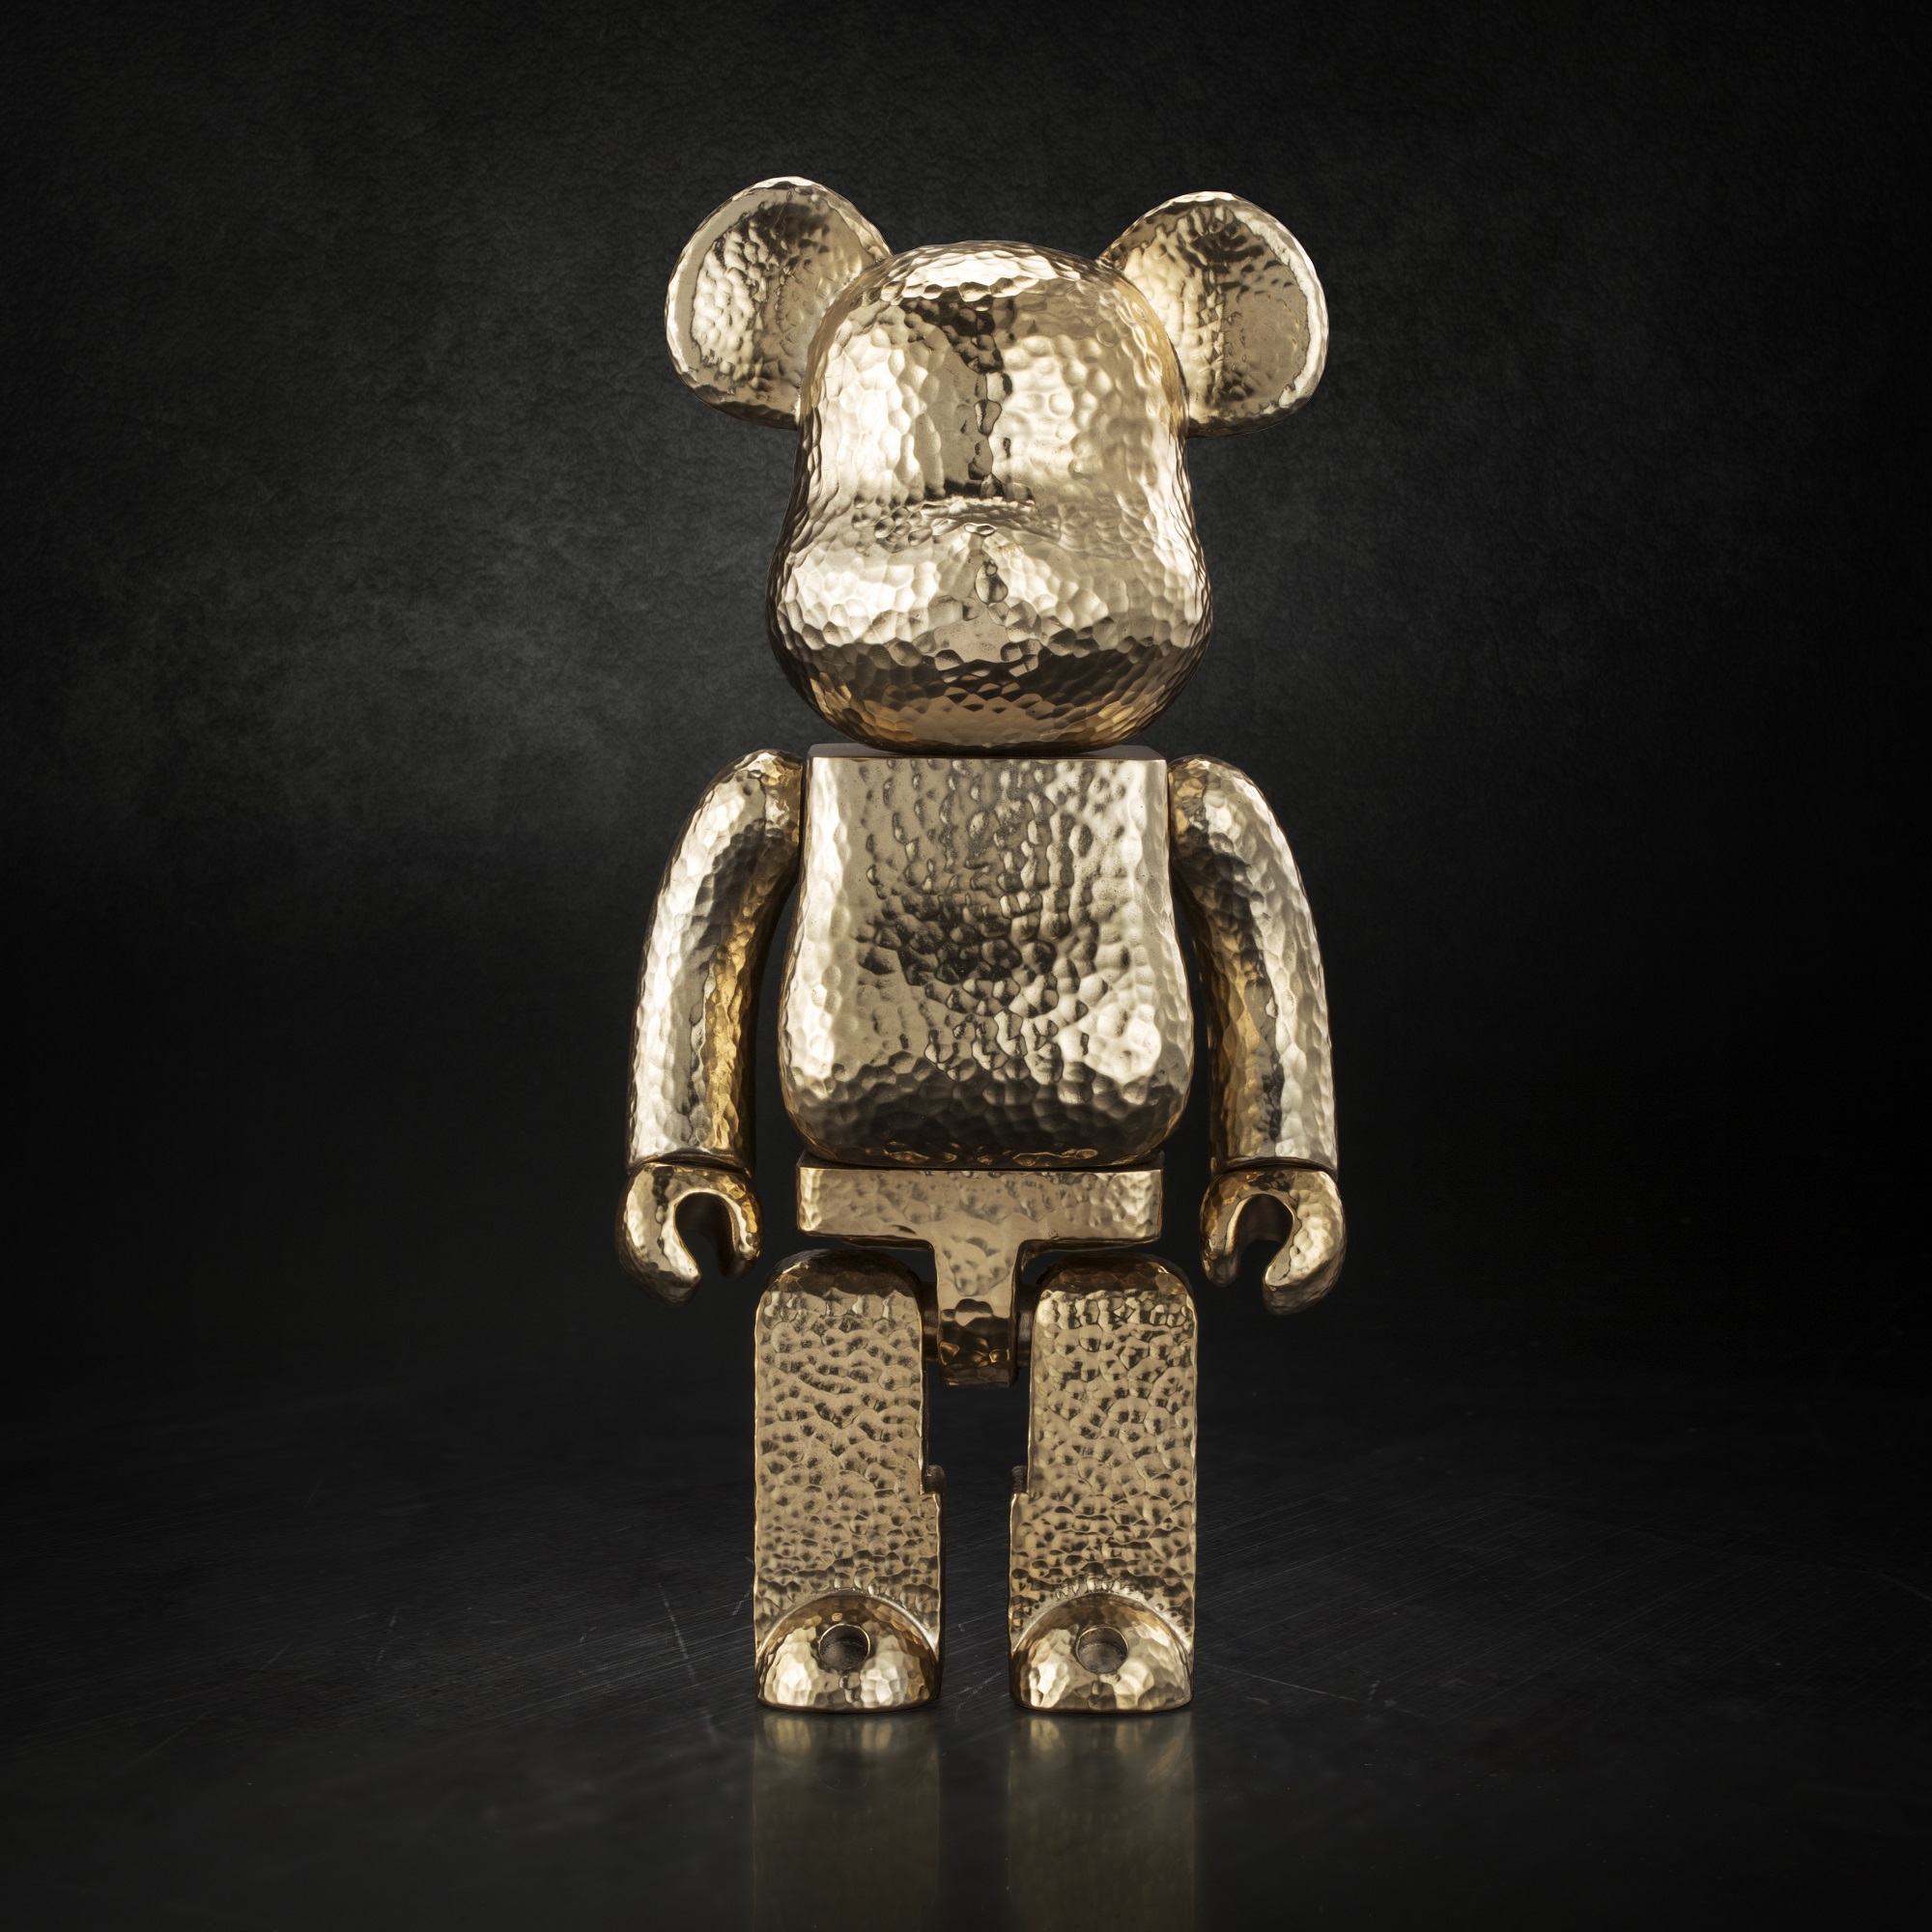 Royal Selangor & MEDICOM TOY Are 400% On Point With This Golden BE